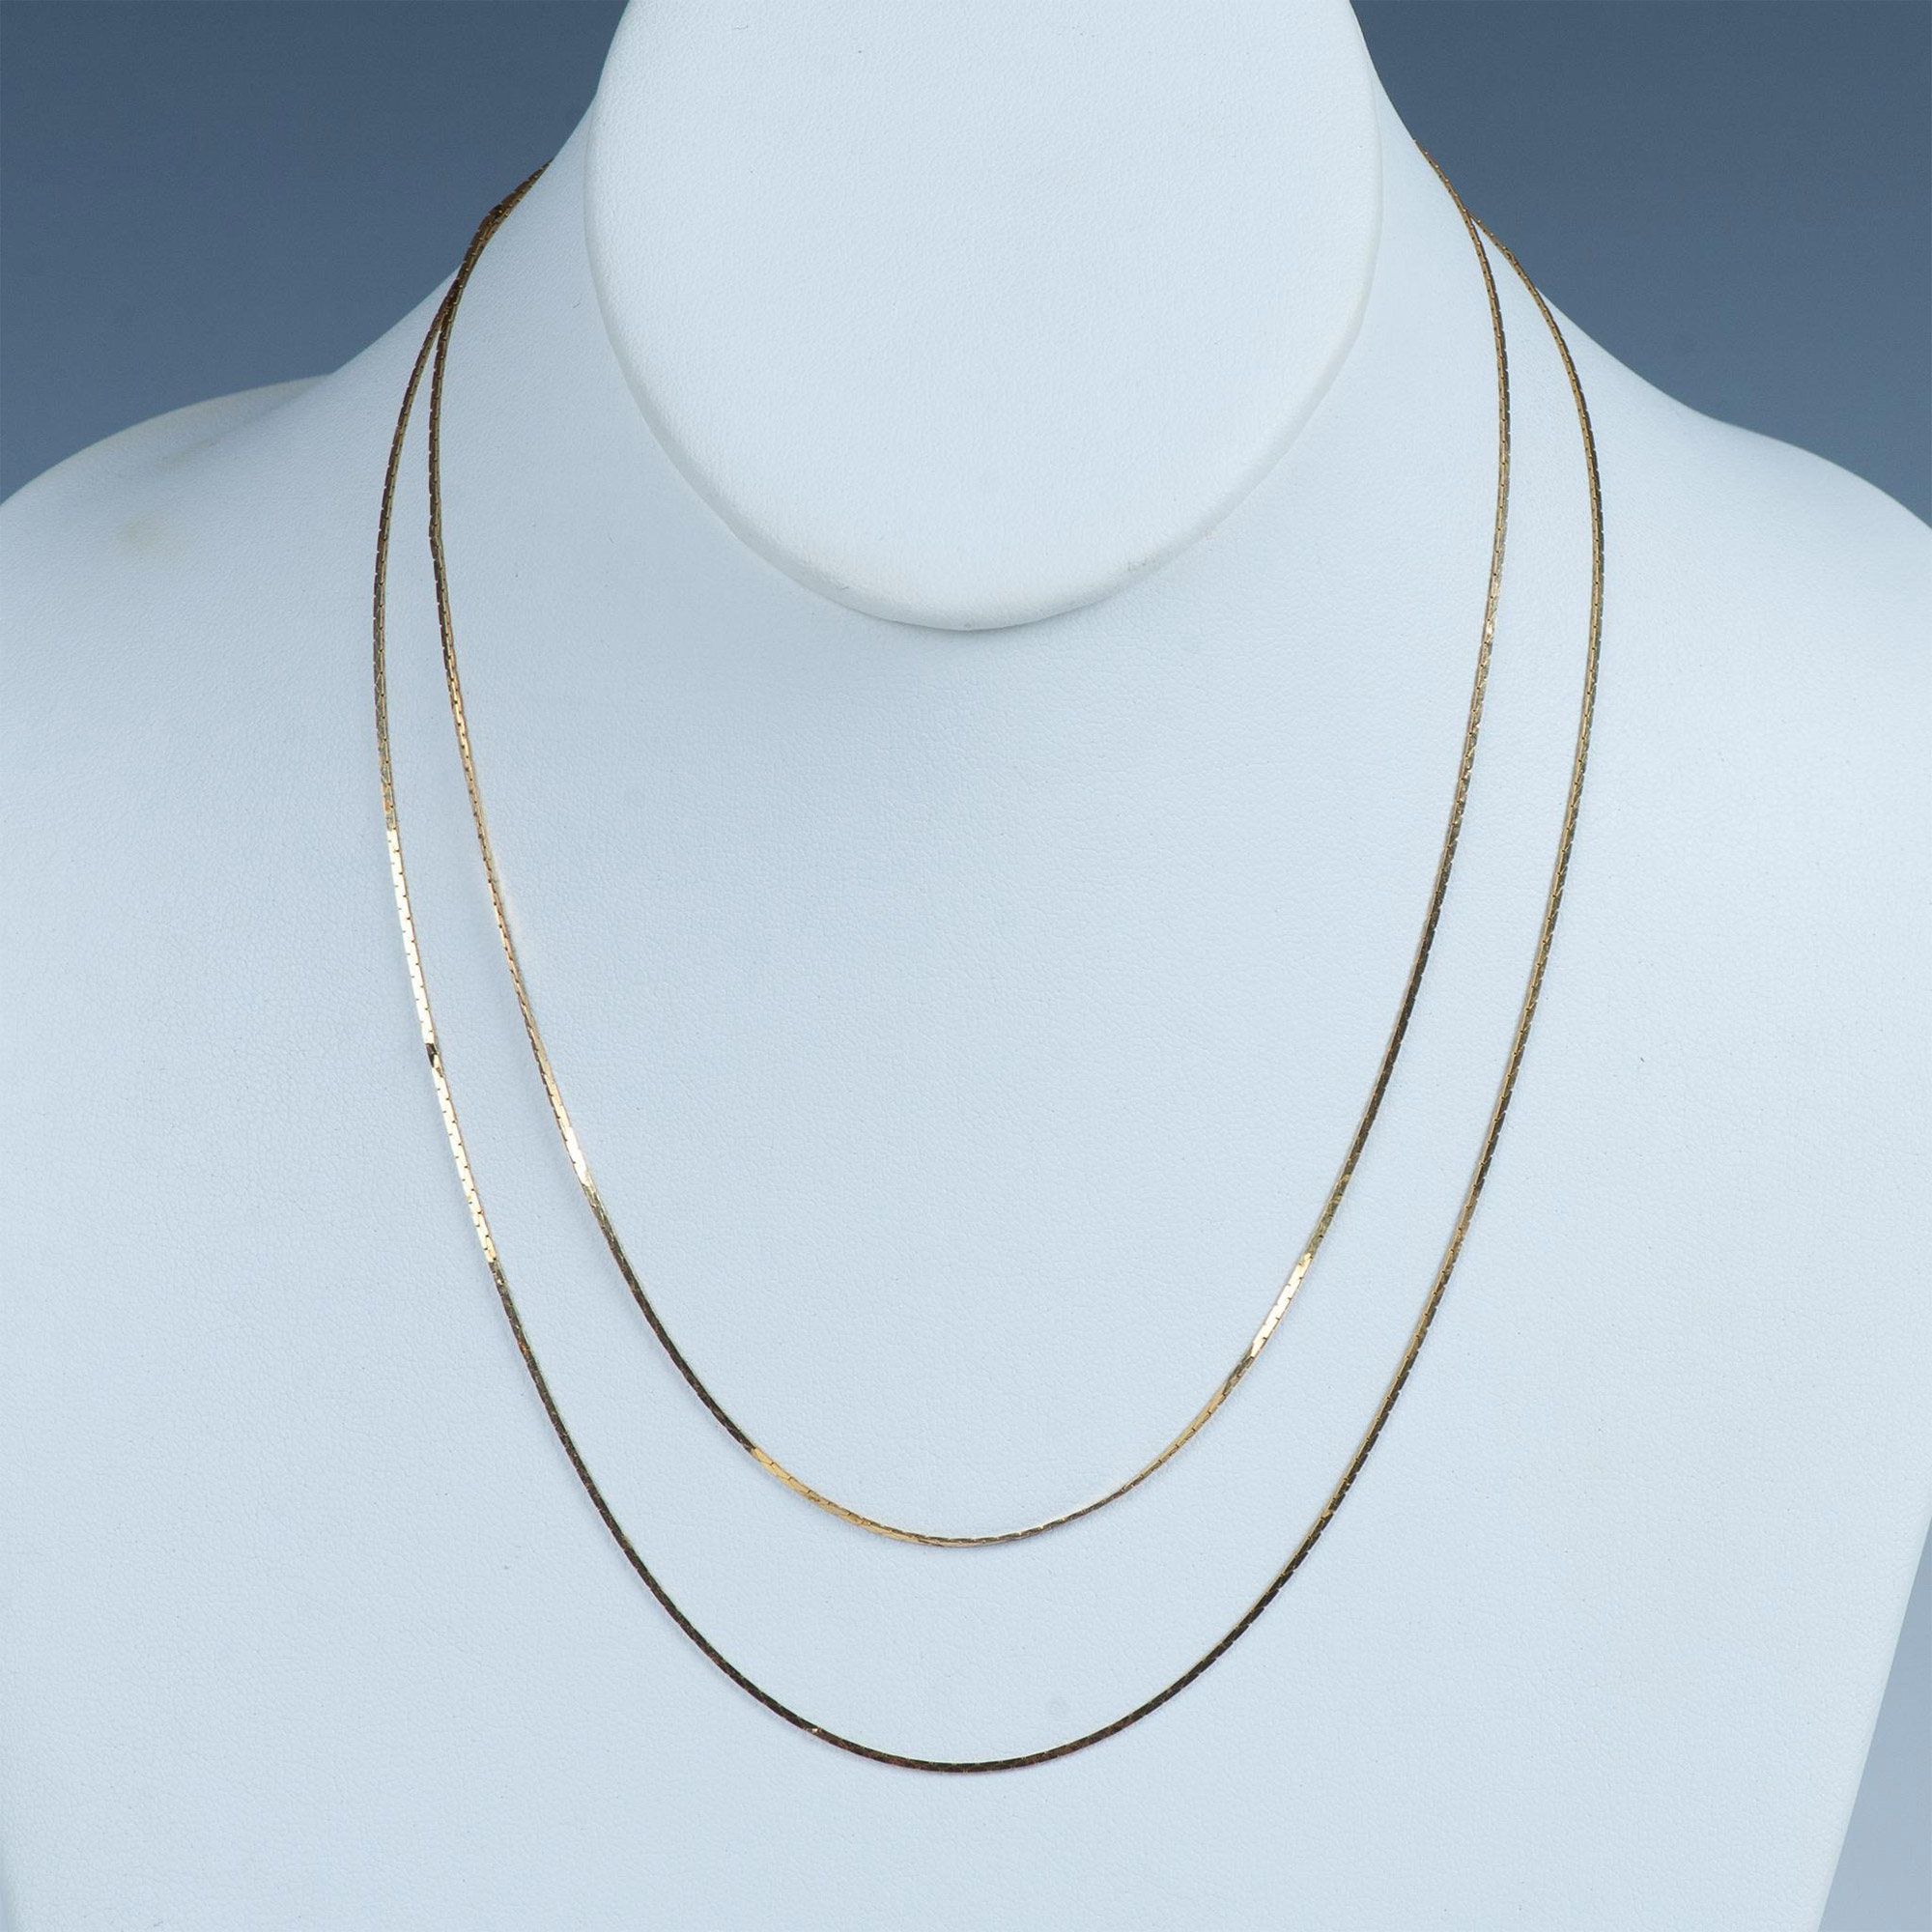 4pc Gold Necklace and Bracelets - Image 6 of 6